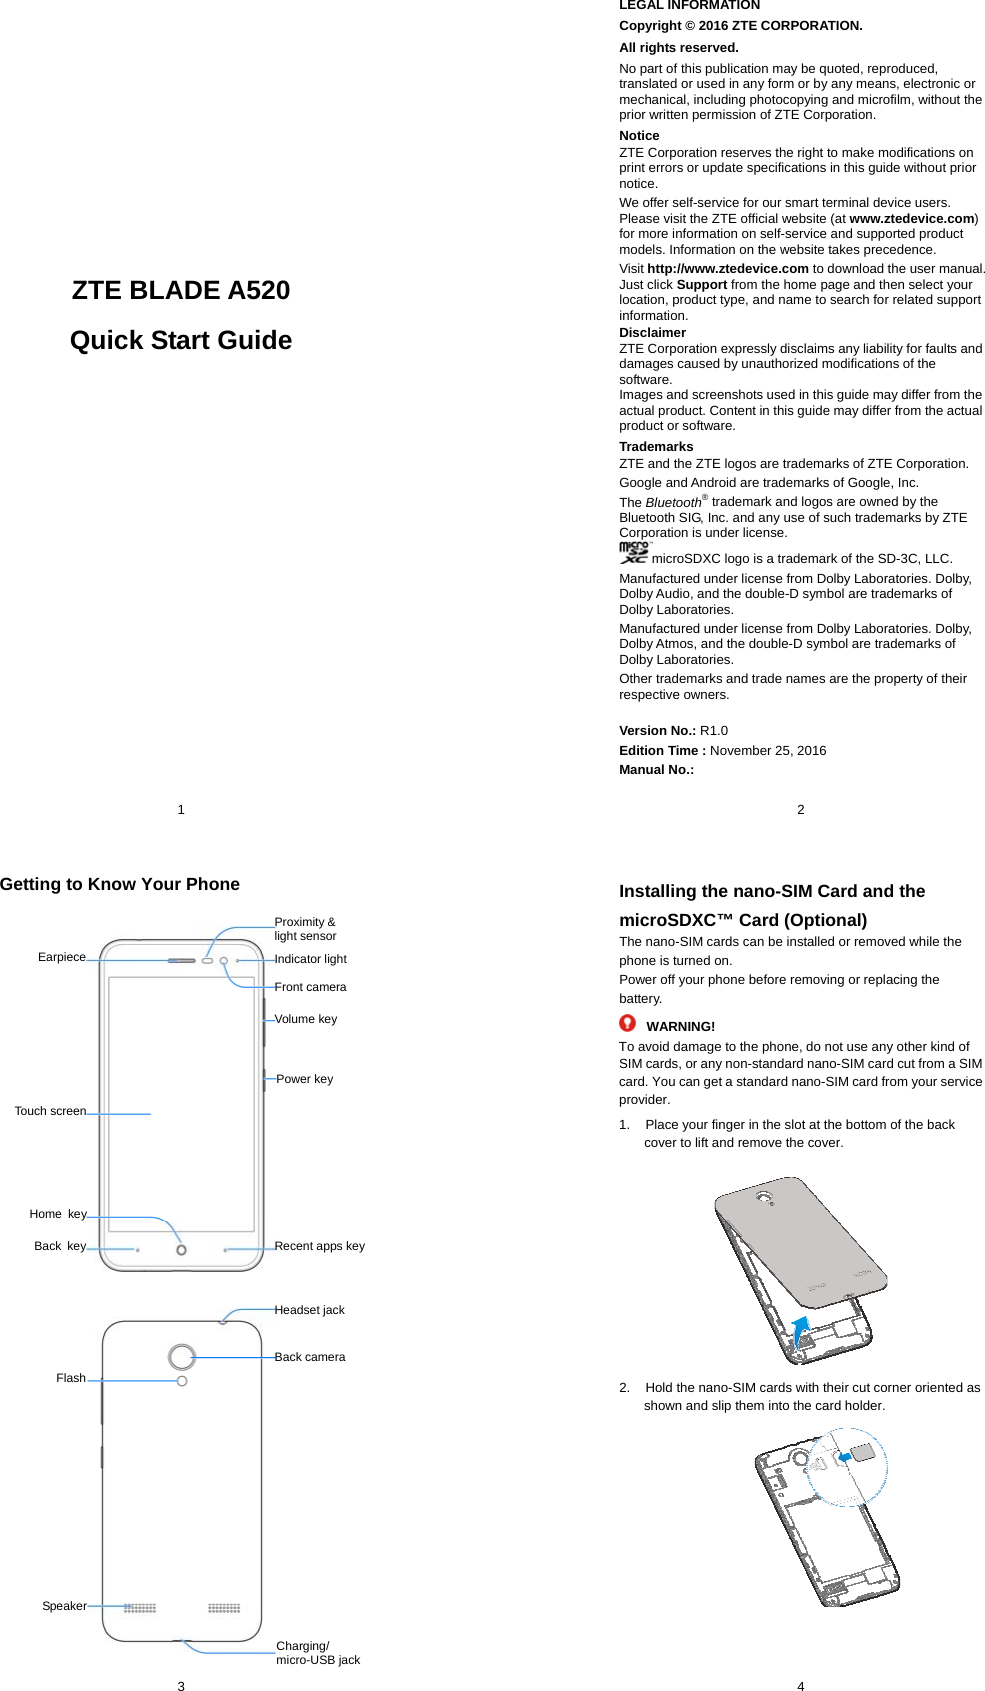  1           ZTE BLADE A520 Quick Start Guide                           2 LEGAL INFORMATION Copyright © 2016 ZTE CORPORATION. All rights reserved. No part of this publication may be quoted, reproduced, translated or used in any form or by any means, electronic or mechanical, including photocopying and microfilm, without the prior written permission of ZTE Corporation. Notice ZTE Corporation reserves the right to make modifications on print errors or update specifications in this guide without prior notice. We offer self-service for our smart terminal device users. Please visit the ZTE official website (at www.ztedevice.com) for more information on self-service and supported product models. Information on the website takes precedence. Visit http://www.ztedevice.com to download the user manual. Just click Support from the home page and then select your location, product type, and name to search for related support information. Disclaimer ZTE Corporation expressly disclaims any liability for faults and damages caused by unauthorized modifications of the software. Images and screenshots used in this guide may differ from the actual product. Content in this guide may differ from the actual product or software. Trademarks ZTE and the ZTE logos are trademarks of ZTE Corporation. Google and Android are trademarks of Google, Inc.   The Bluetooth® trademark and logos are owned by the Bluetooth SIG, Inc. and any use of such trademarks by ZTE Corporation is under license.   microSDXC logo is a trademark of the SD-3C, LLC.   Manufactured under license from Dolby Laboratories. Dolby, Dolby Audio, and the double-D symbol are trademarks of Dolby Laboratories. Manufactured under license from Dolby Laboratories. Dolby, Dolby Atmos, and the double-D symbol are trademarks of Dolby Laboratories. Other trademarks and trade names are the property of their respective owners. Version No.: R1.0 Edition Time : November 25, 2016 Manual No.:  3 Getting to Know Your Phone     Front camera Proximity &amp; light sensor Charging/ micro-USB jack Back camera Indicator light Volume key Power key EarpieceTouch screenRecent apps key Home keyBack keyHeadset jackSpeakerFlash 4 Installing the nano-SIM Card and the microSDXC™ Card (Optional) The nano-SIM cards can be installed or removed while the phone is turned on. Power off your phone before removing or replacing the battery. WARNING! To avoid damage to the phone, do not use any other kind of SIM cards, or any non-standard nano-SIM card cut from a SIM card. You can get a standard nano-SIM card from your service provider. 1.  Place your finger in the slot at the bottom of the back cover to lift and remove the cover.  2.  Hold the nano-SIM cards with their cut corner oriented as shown and slip them into the card holder.          